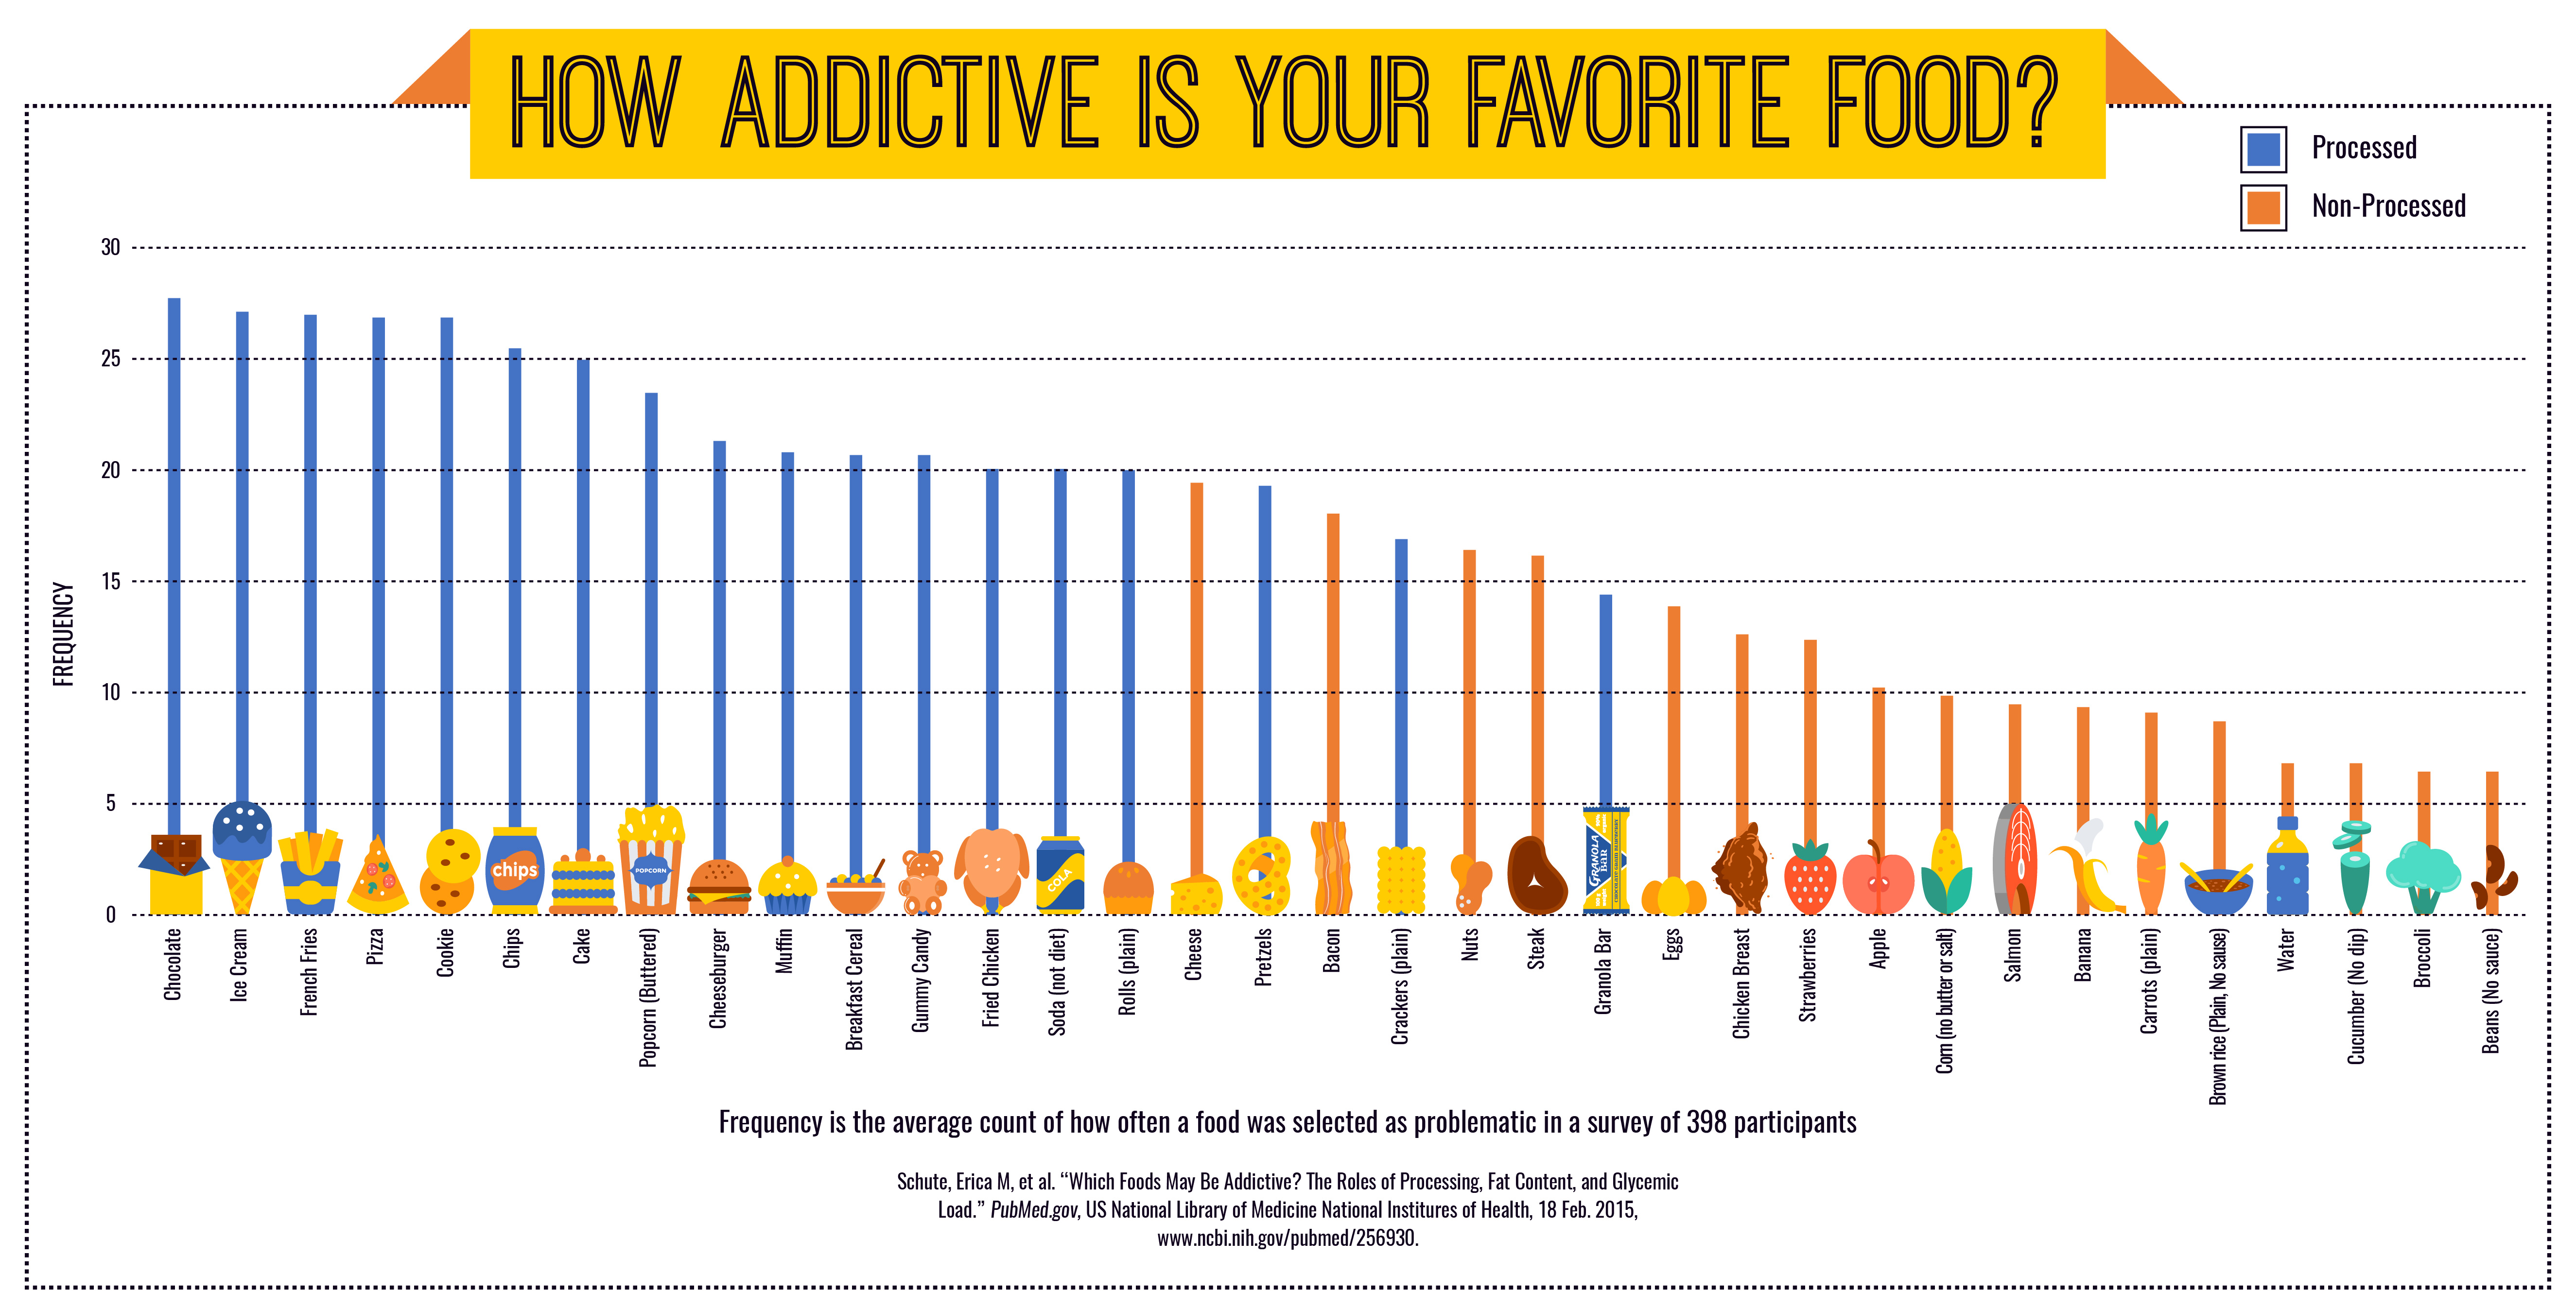 How addictive is your favorite food graph